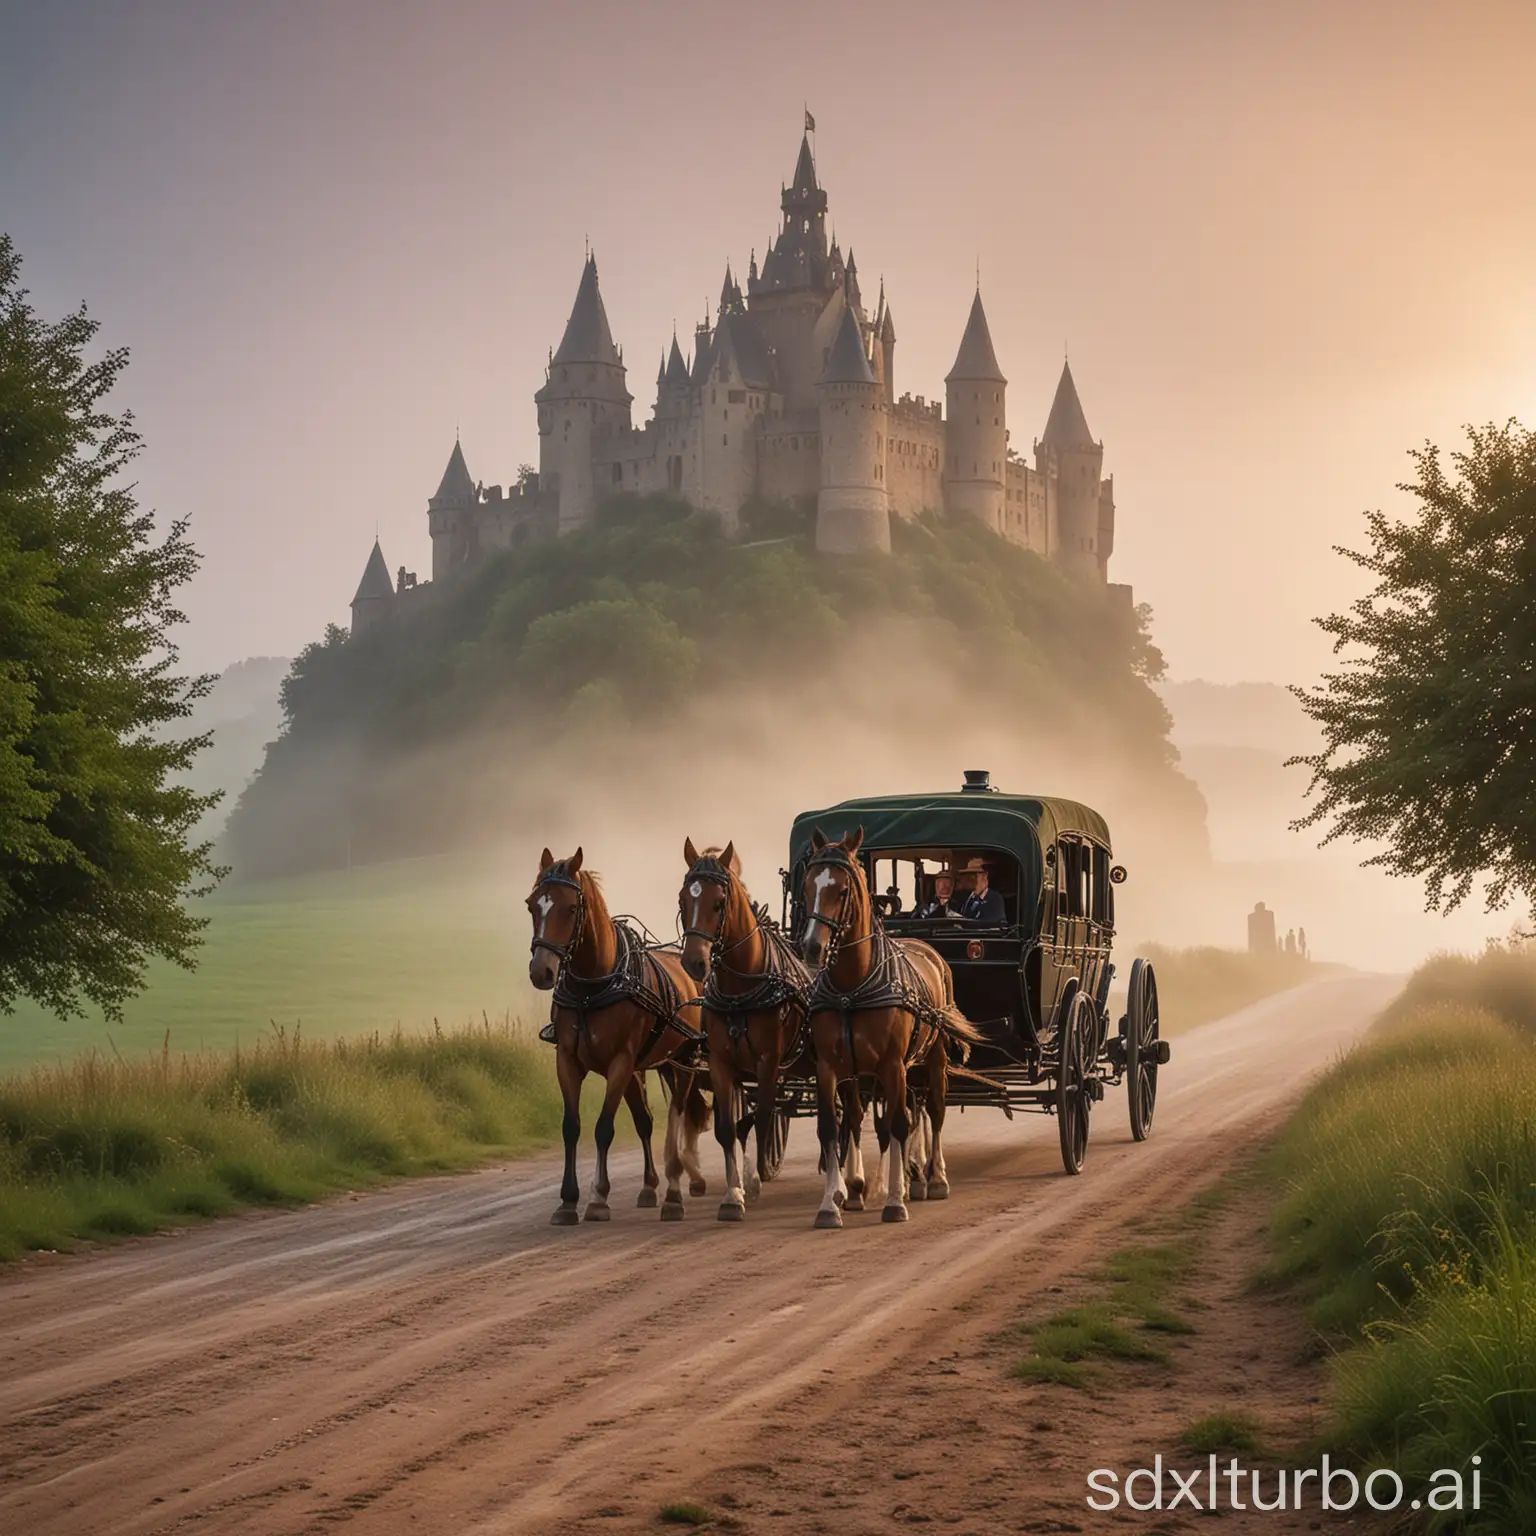 Luxury-European-Carriage-with-Horses-Approaching-Ancient-Castle-at-Dusk